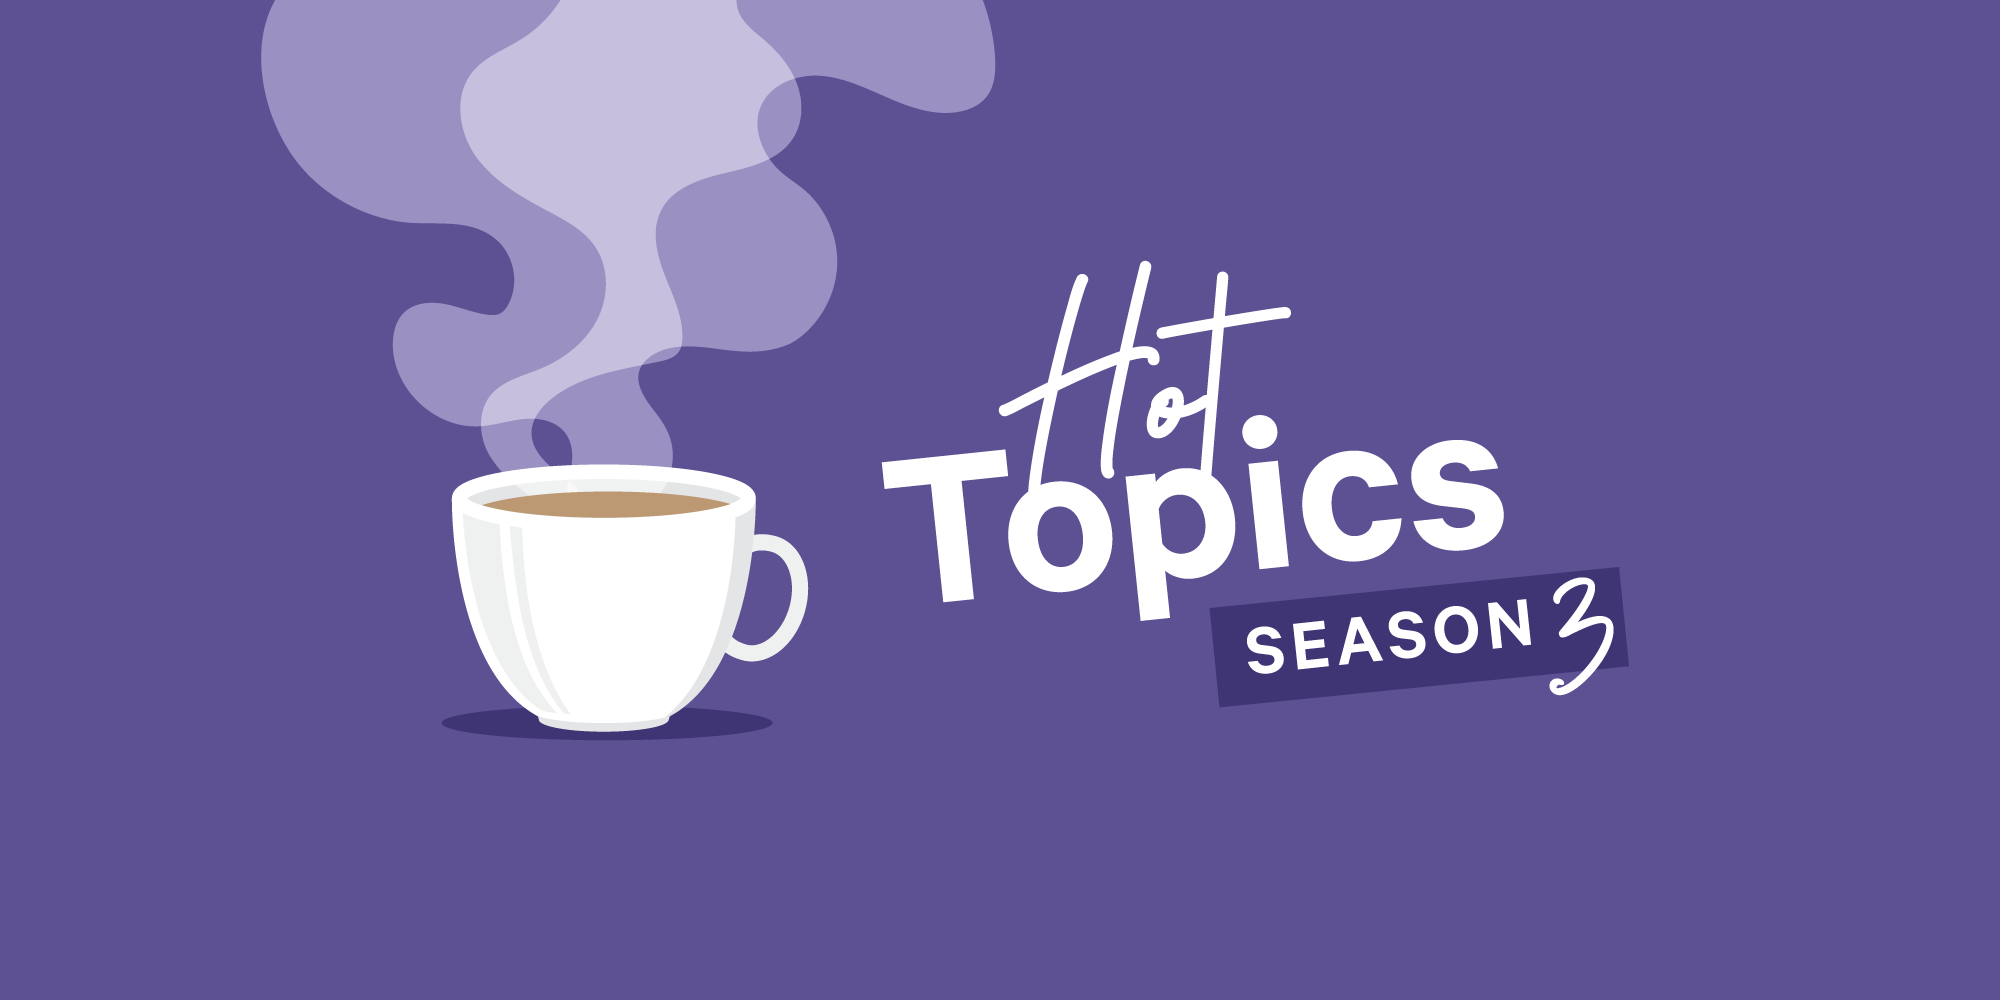 Hot Topics Episode 31: Finding Value in Your Work